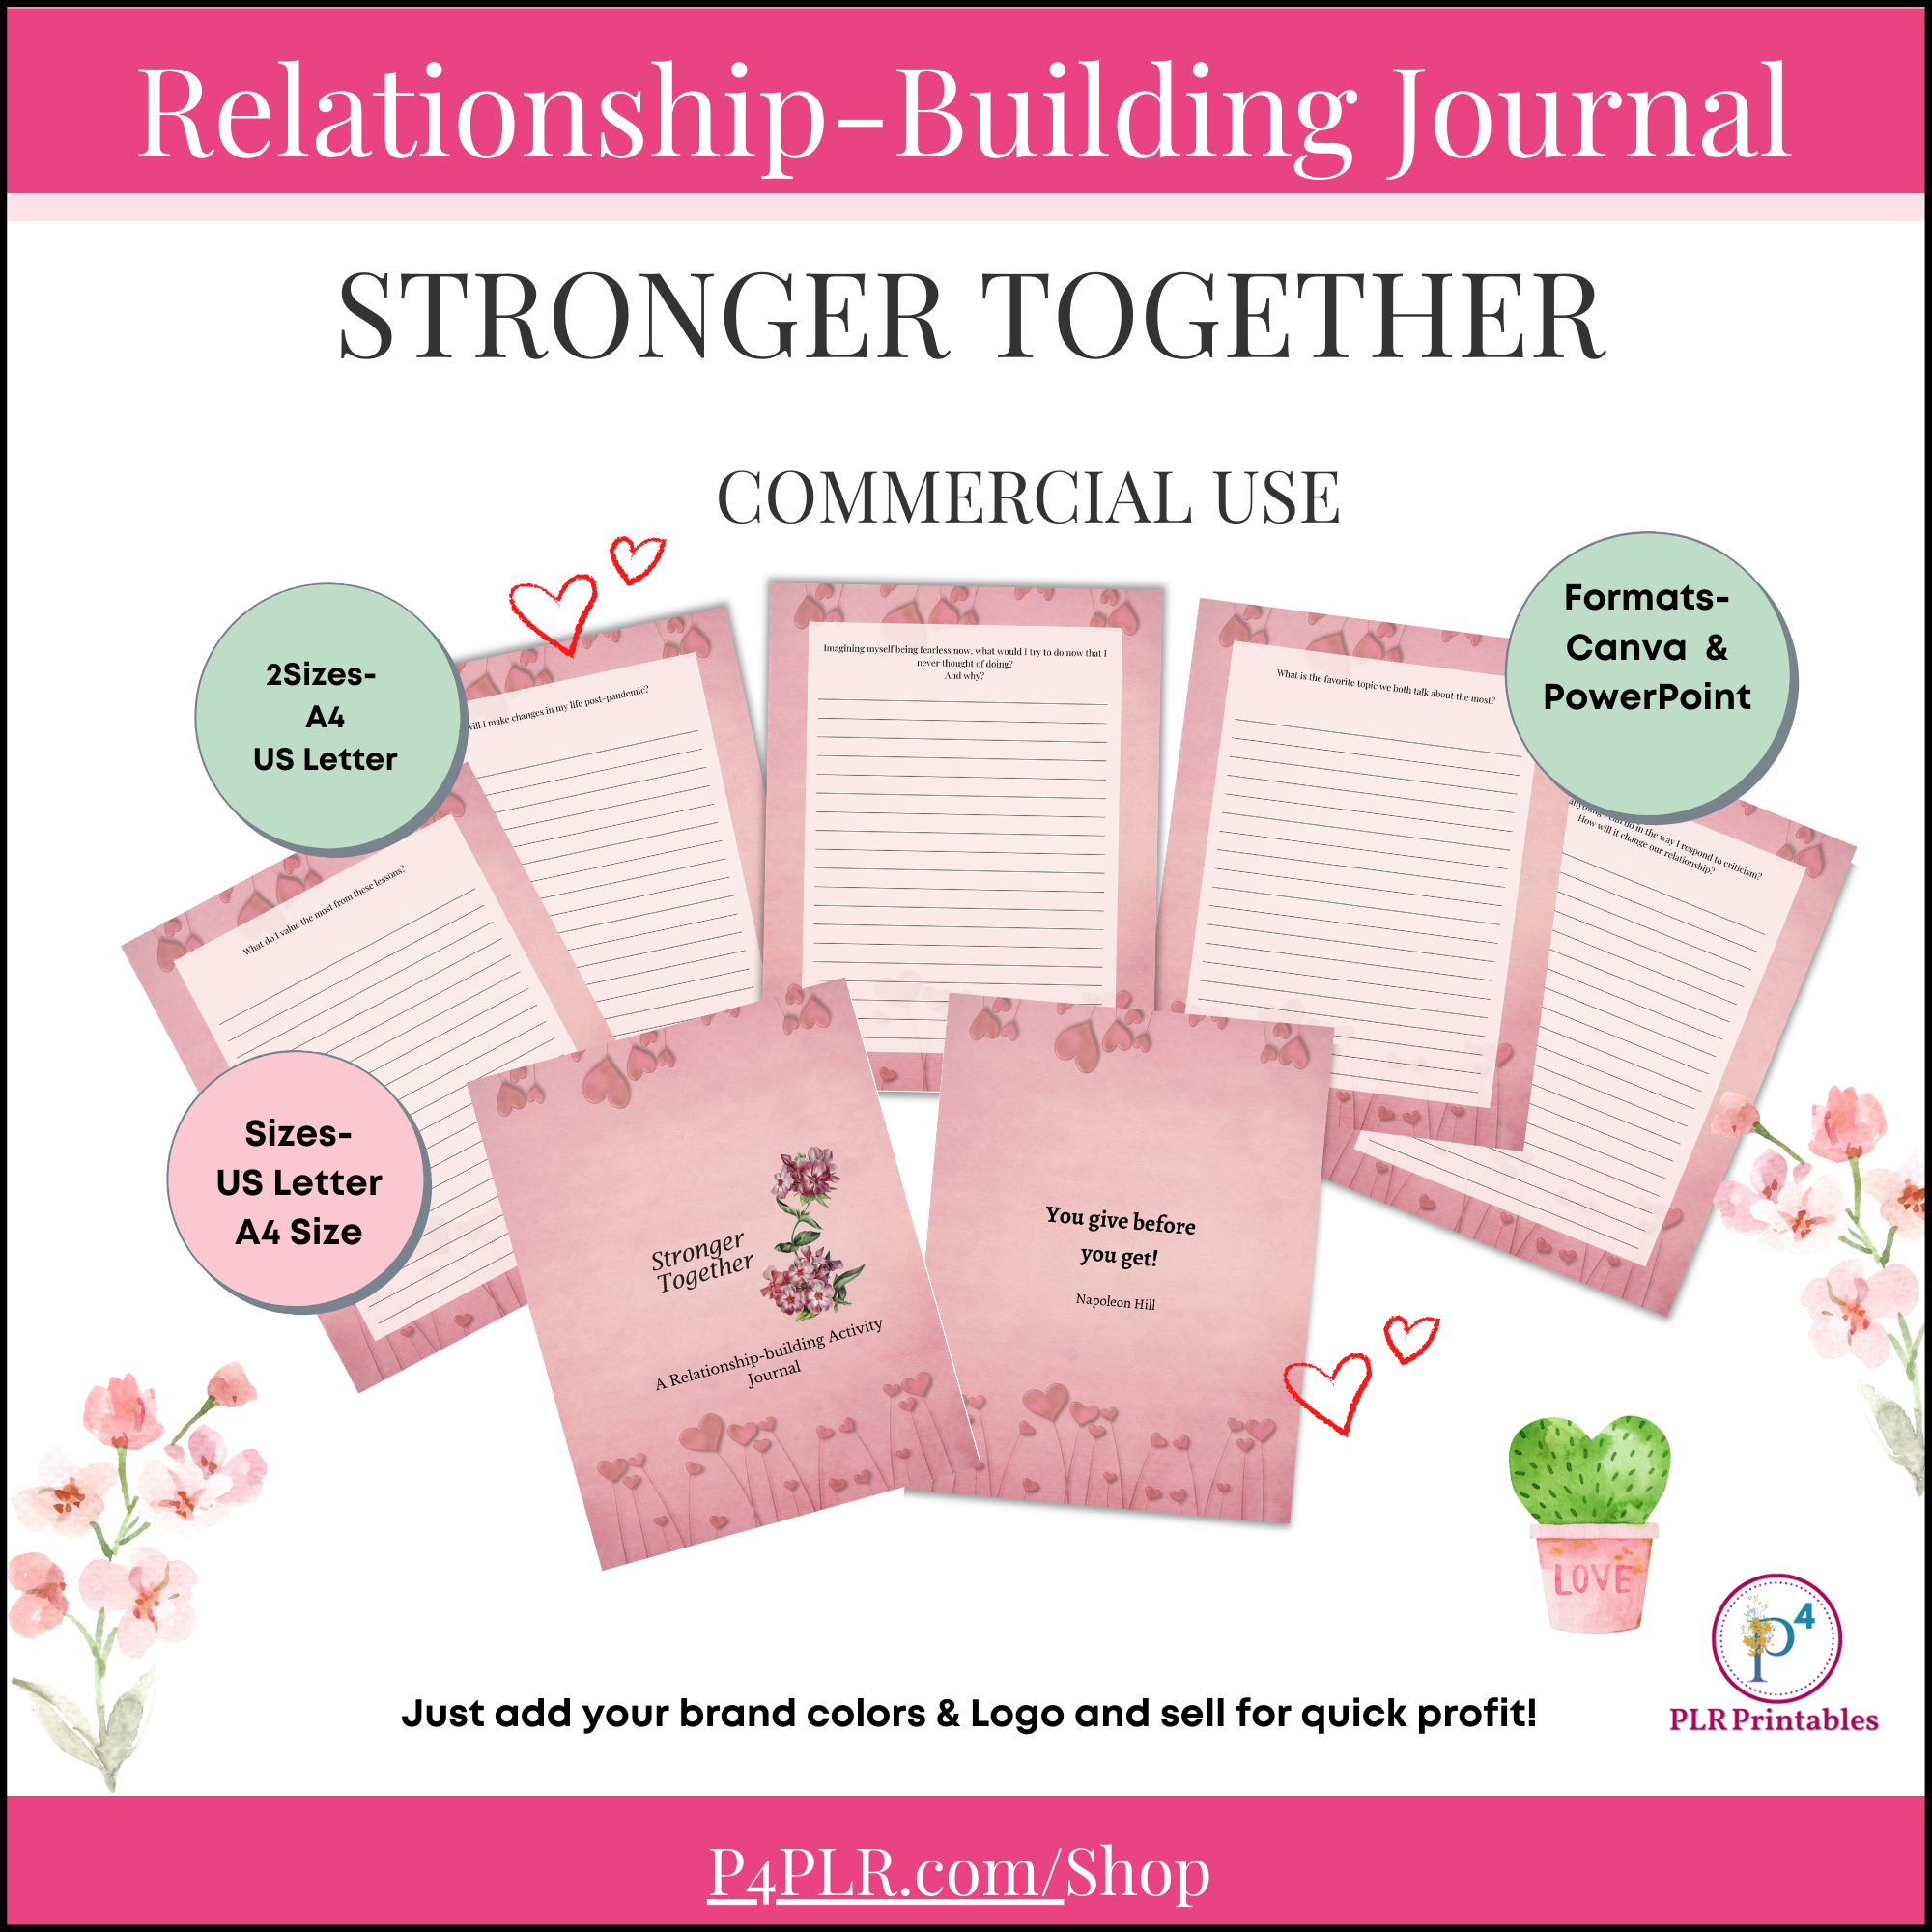 Stronger together: A Relationship Building Activity Journal